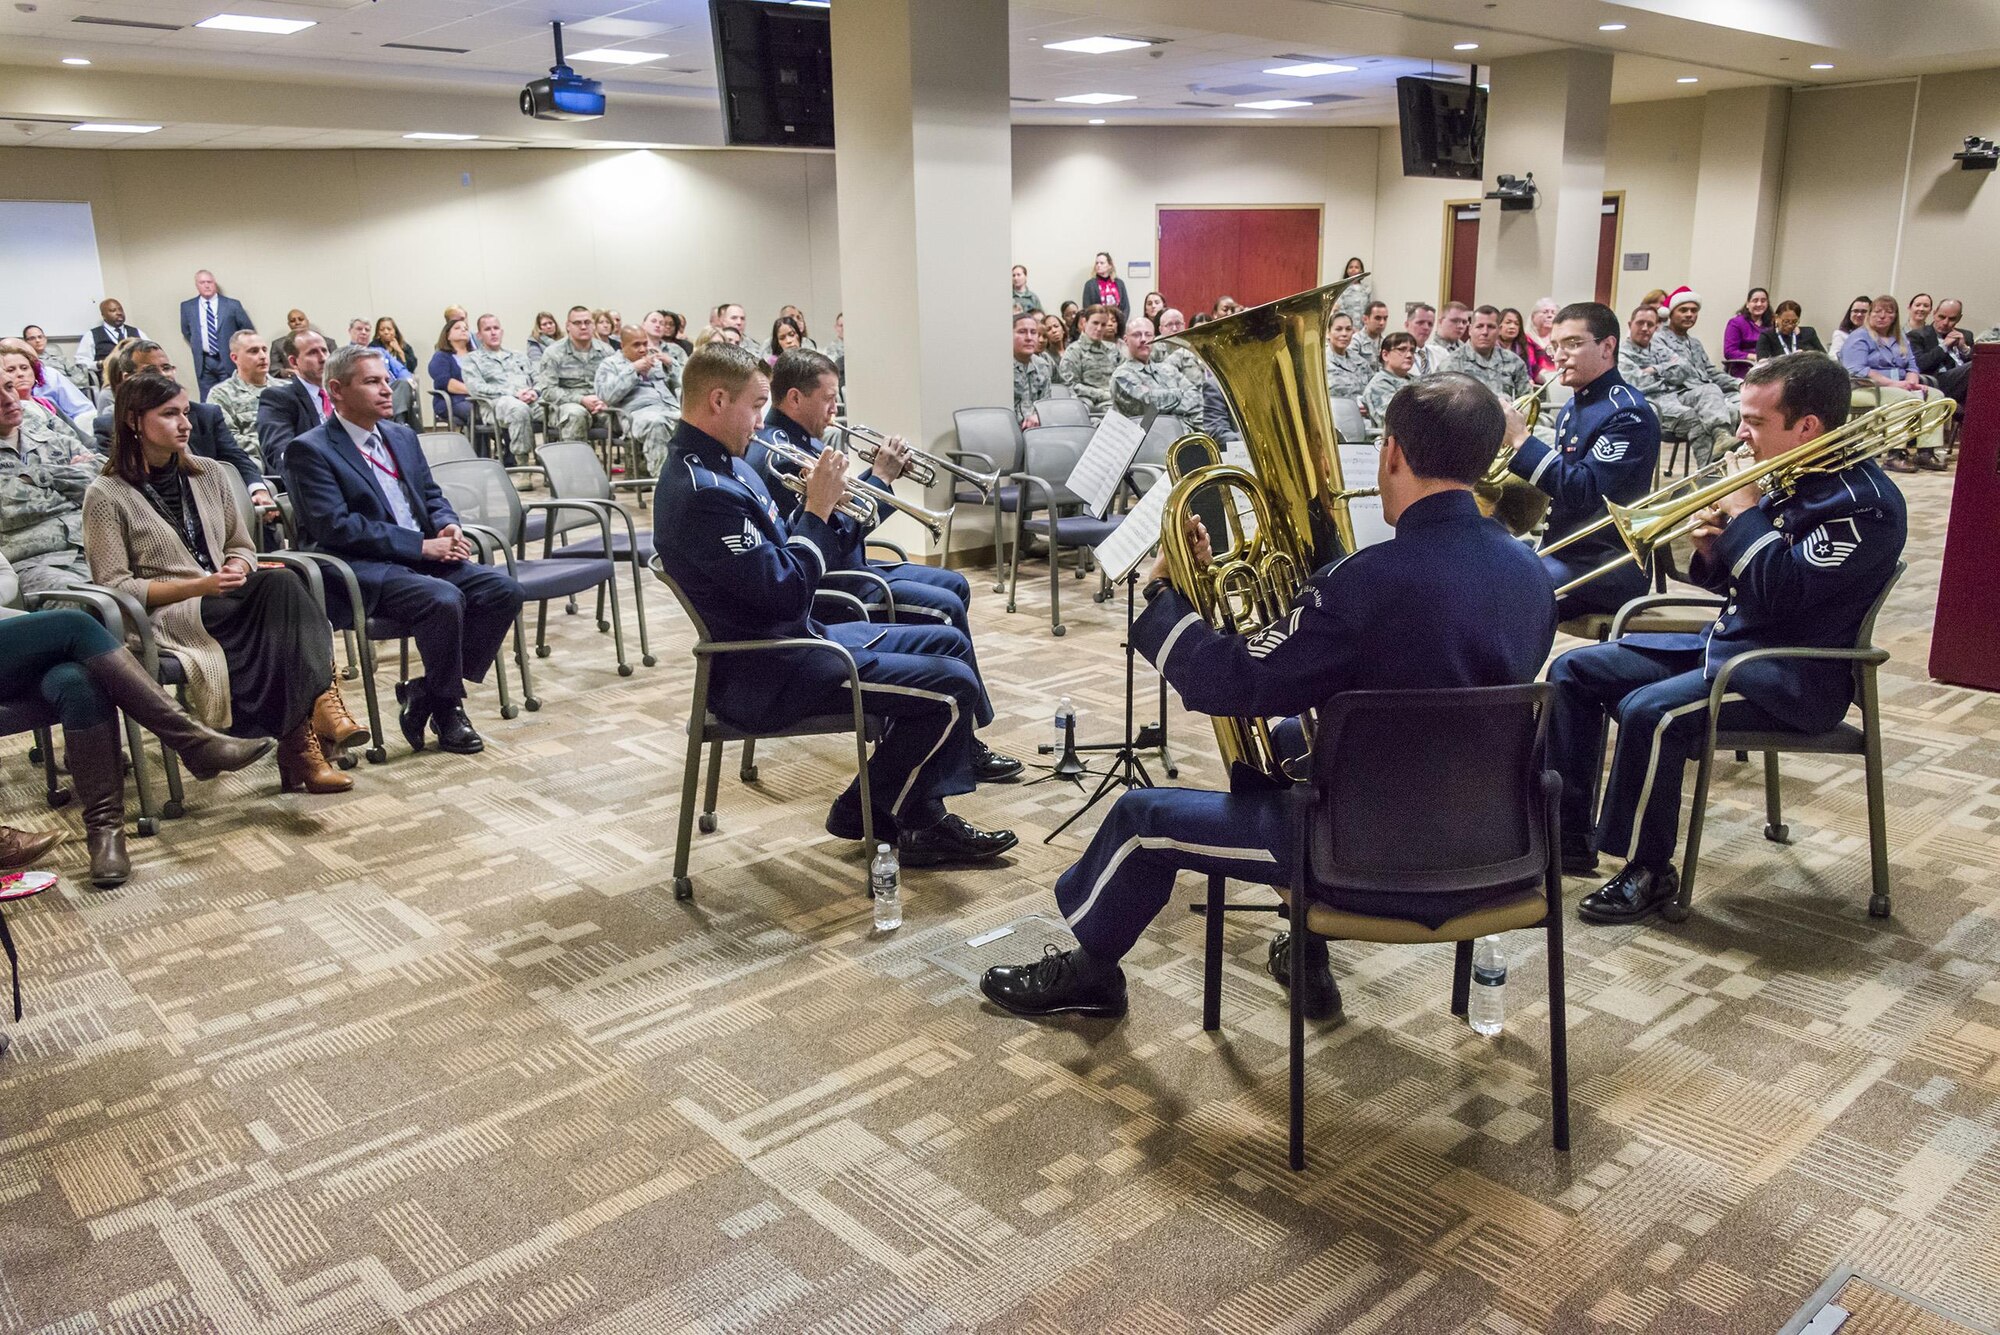 Tis the season for music courtesy of the U.S. Air Force Brass Quintet, shown as they perform holiday favorites Dec. 14 at the Russell Knox Building Collaboration Center, Marine Corps Base Quantico, Va. The ensemble of Air Force NCOs and Senior NCO's appeared at the invitation of the Air Force Office of Special Investigations headquarters. (U.S. Air Force photo/Michael Hastings)  